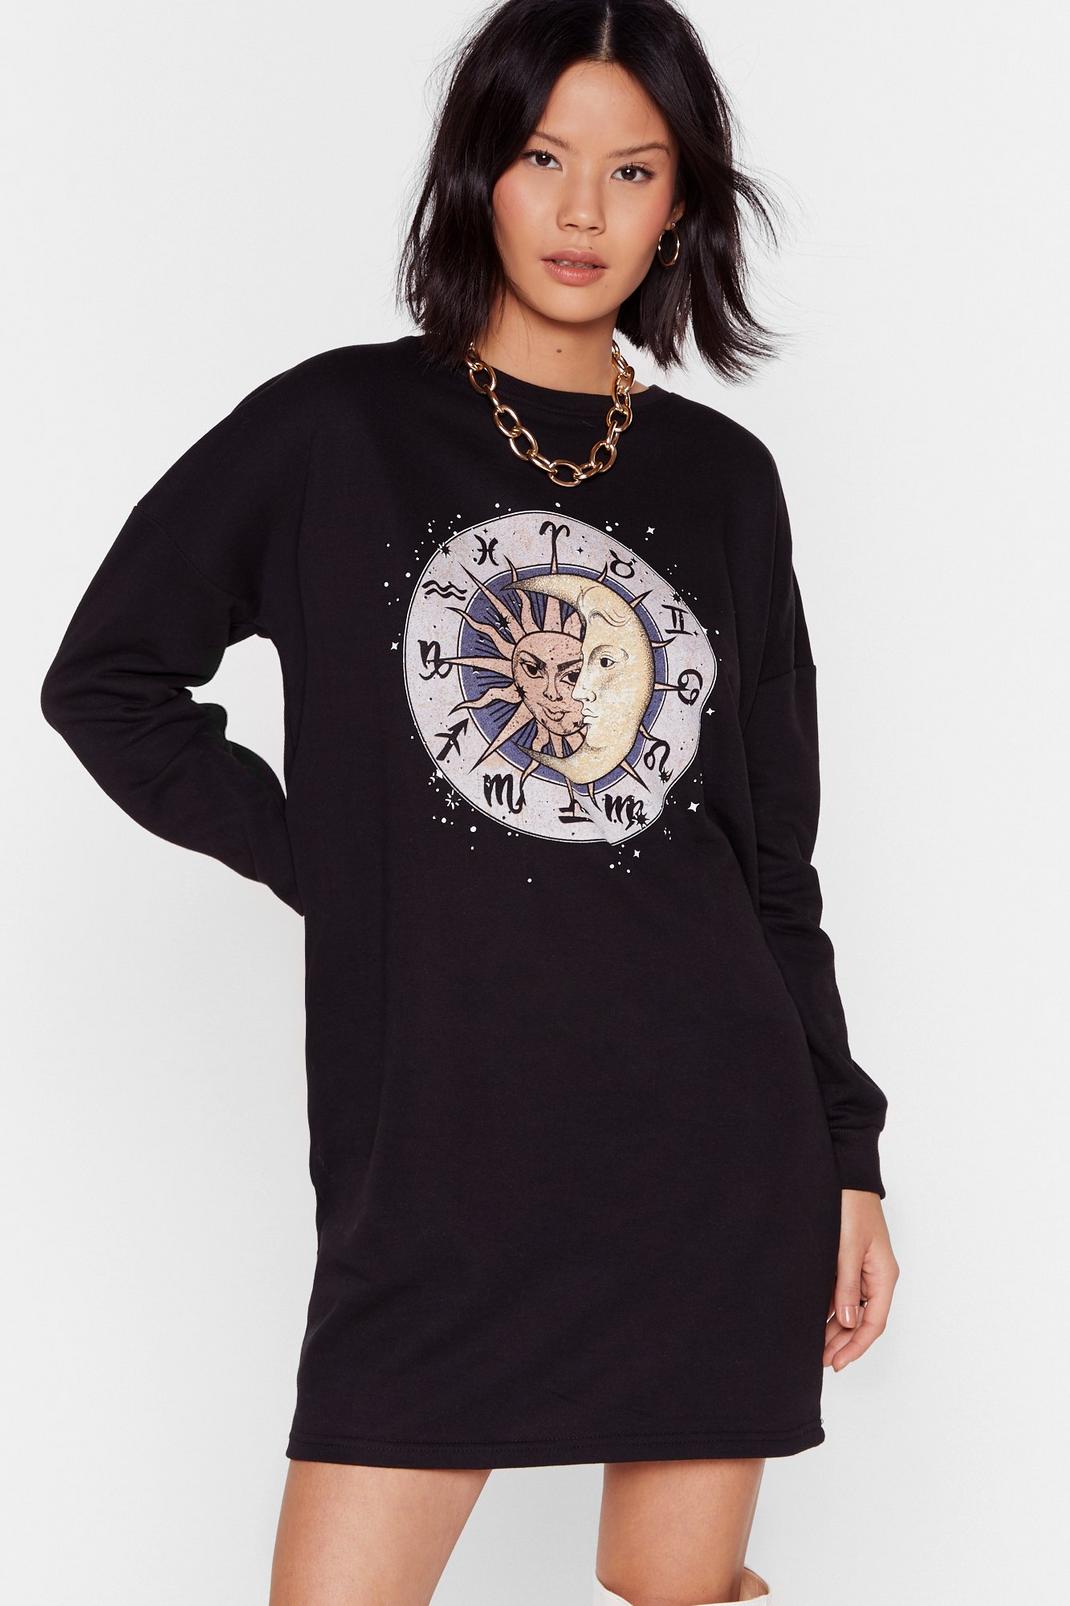 Horoscope Out the Situation Graphic Sweatshirt Dress image number 1